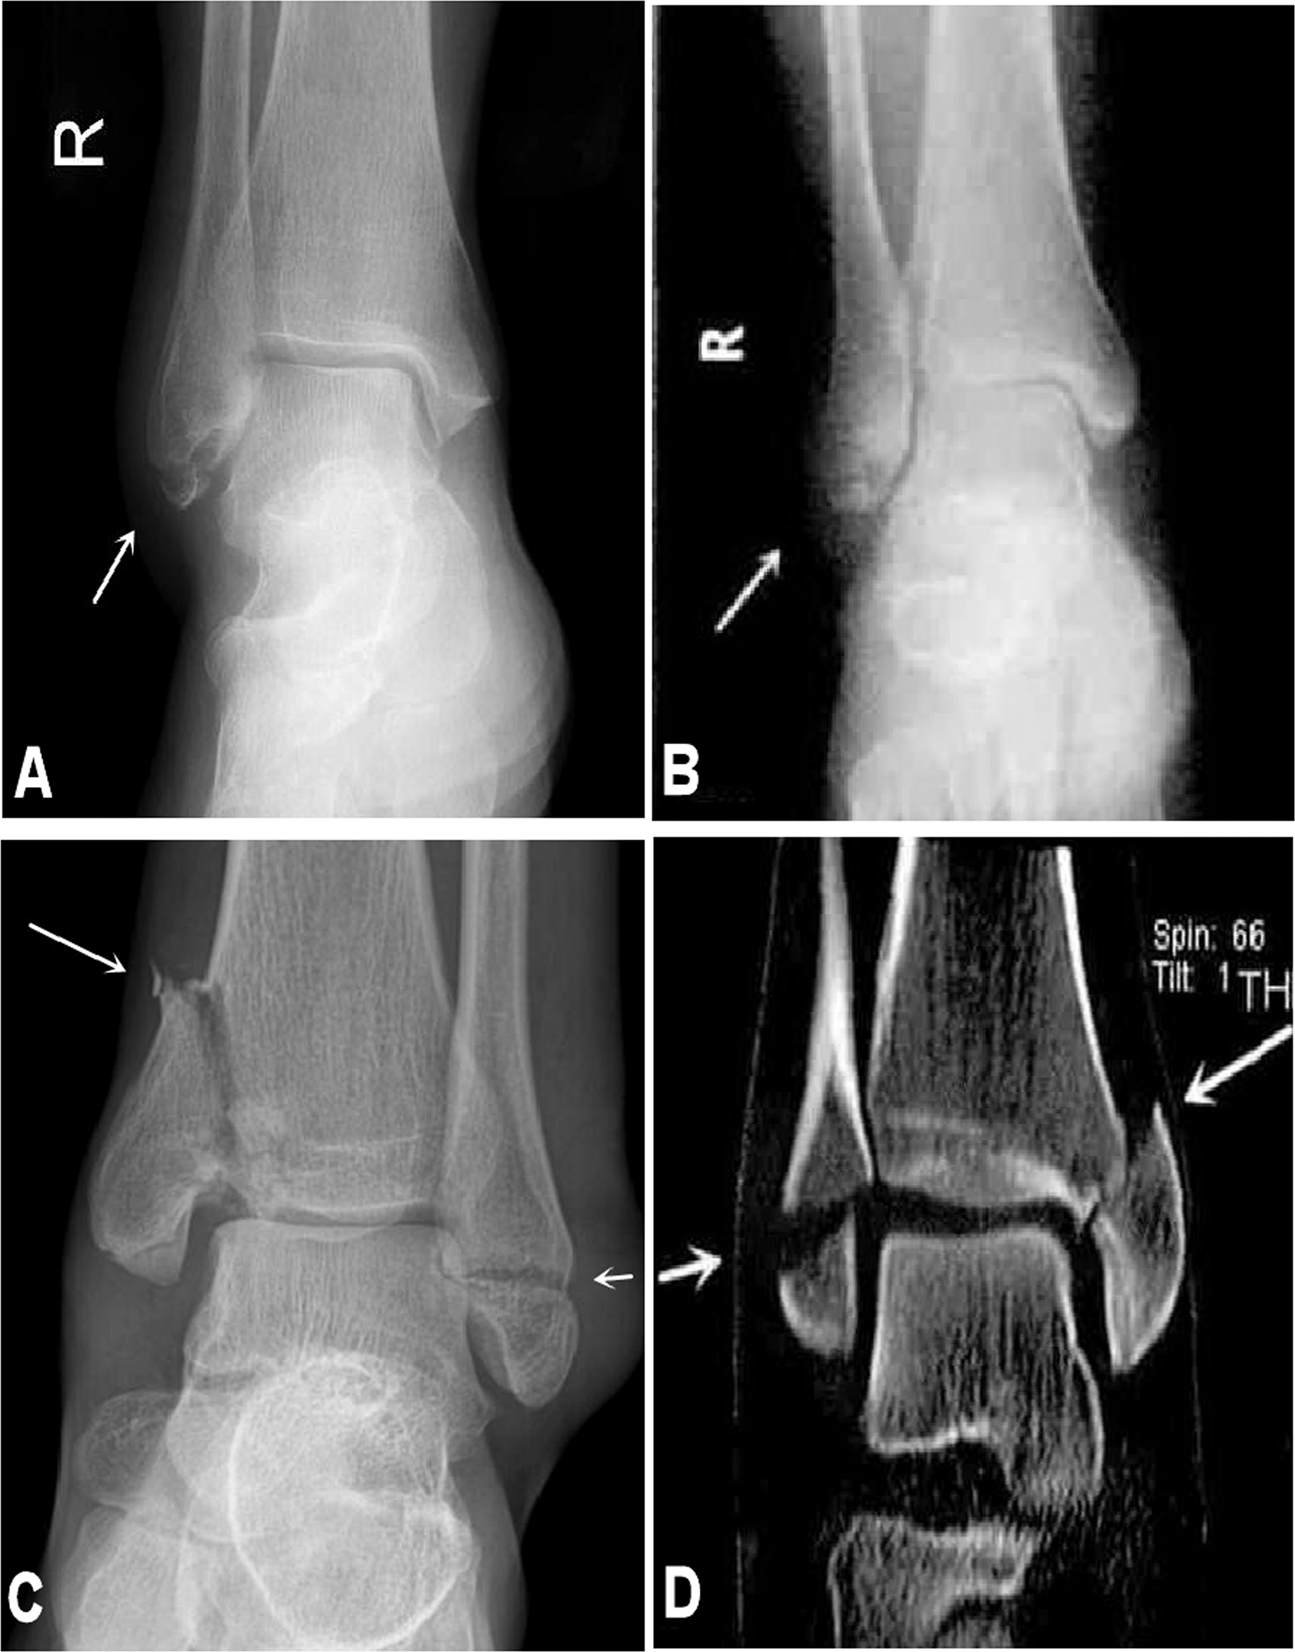 Radiographic analysis of adult ankle fractures using combined Danis-Weber  and Lauge-Hansen classification systems | Scientific Reports